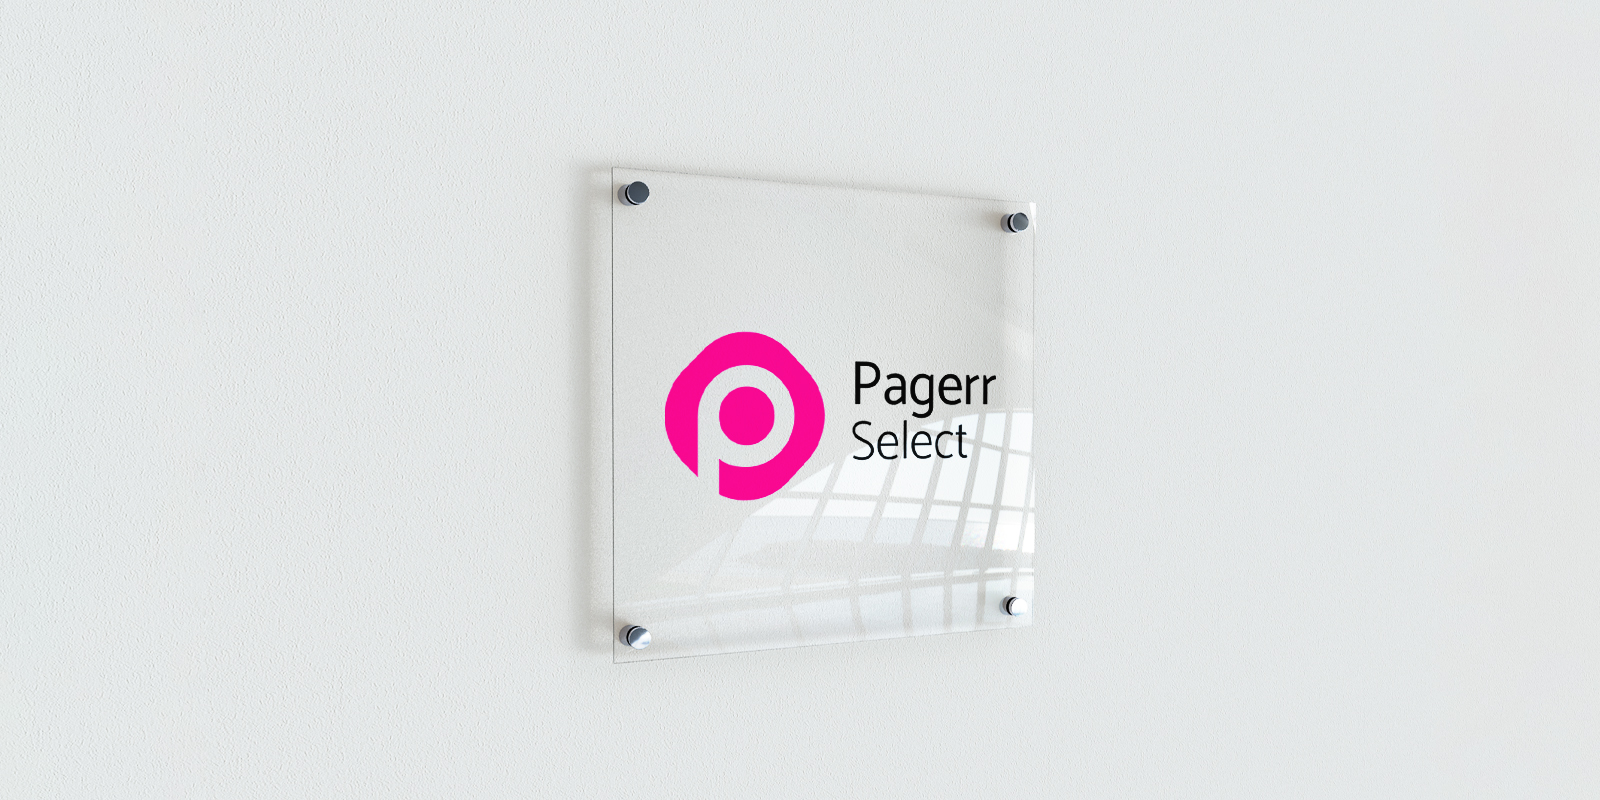 Acrylic signs in Cairns - Print with Pagerr